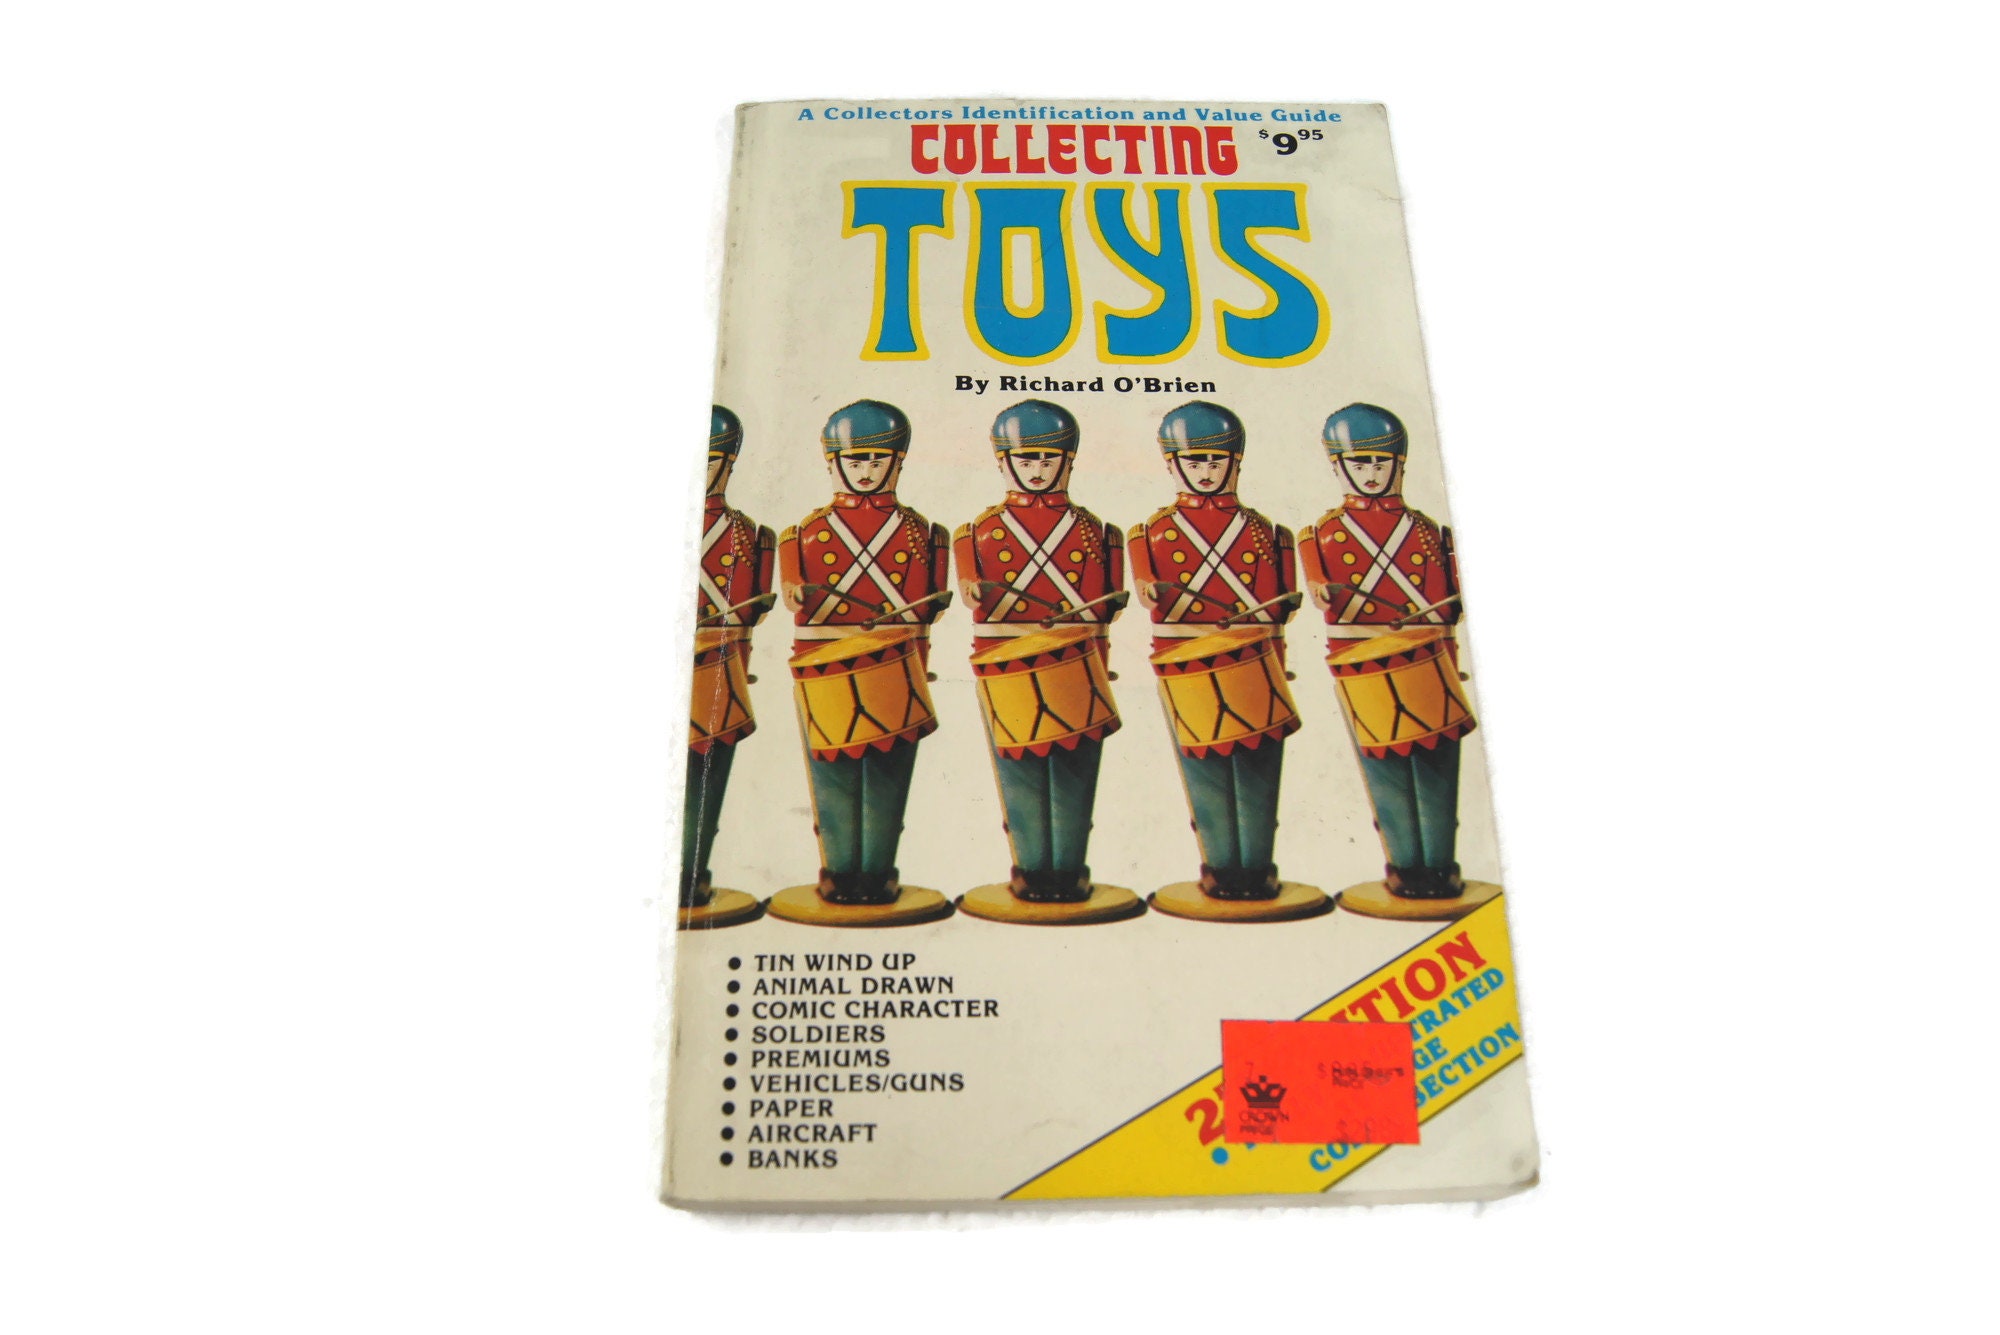 An Identification and Value Guide by Richard O'Brien for sale online Trade Paperback Collecting Toys 